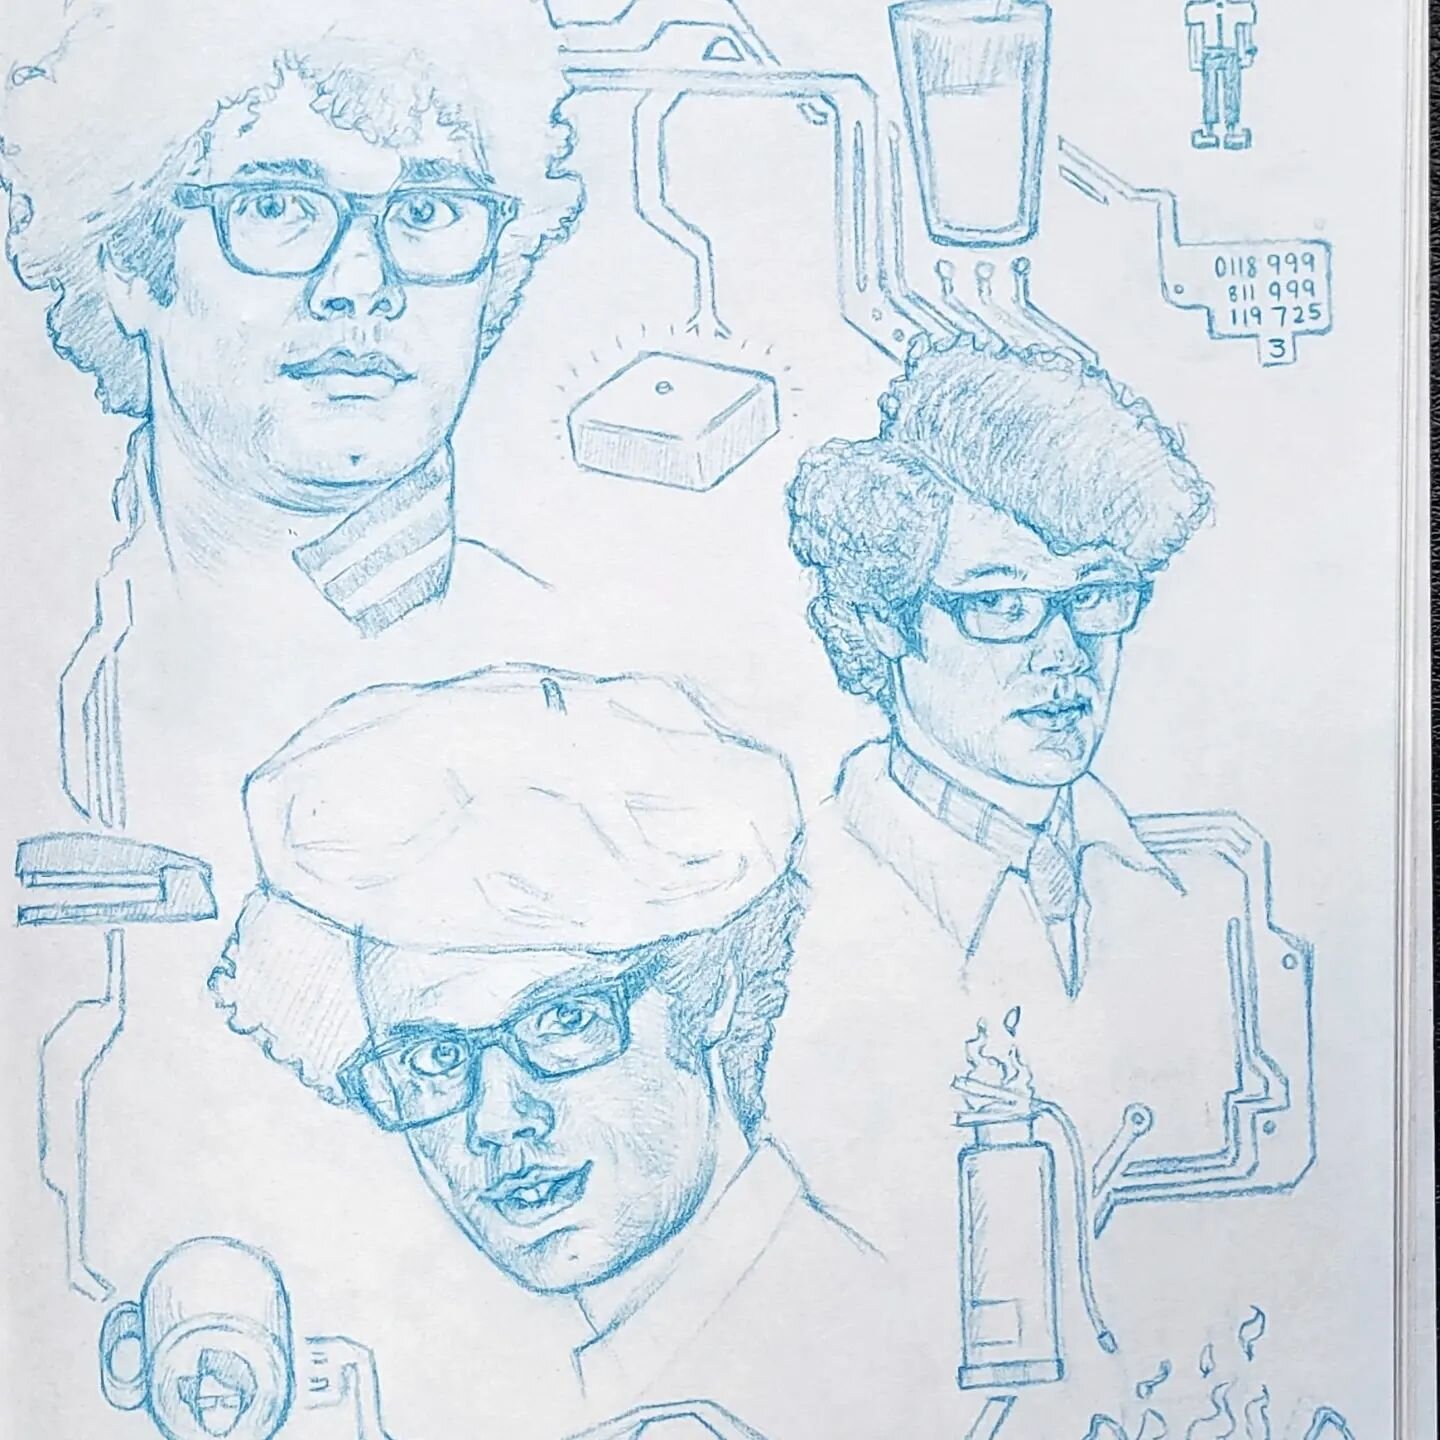 Name that tv show!&nbsp;

Some sketches while at work.&nbsp;

#art #artist #artwork #pencildrawing #pendrawing #penandink #ink #likeness #illustration #sketch #sketches #sketchbook #sketchbookdrawing #itcrowd #moss #roy #jen #richardayoade #chrisodow